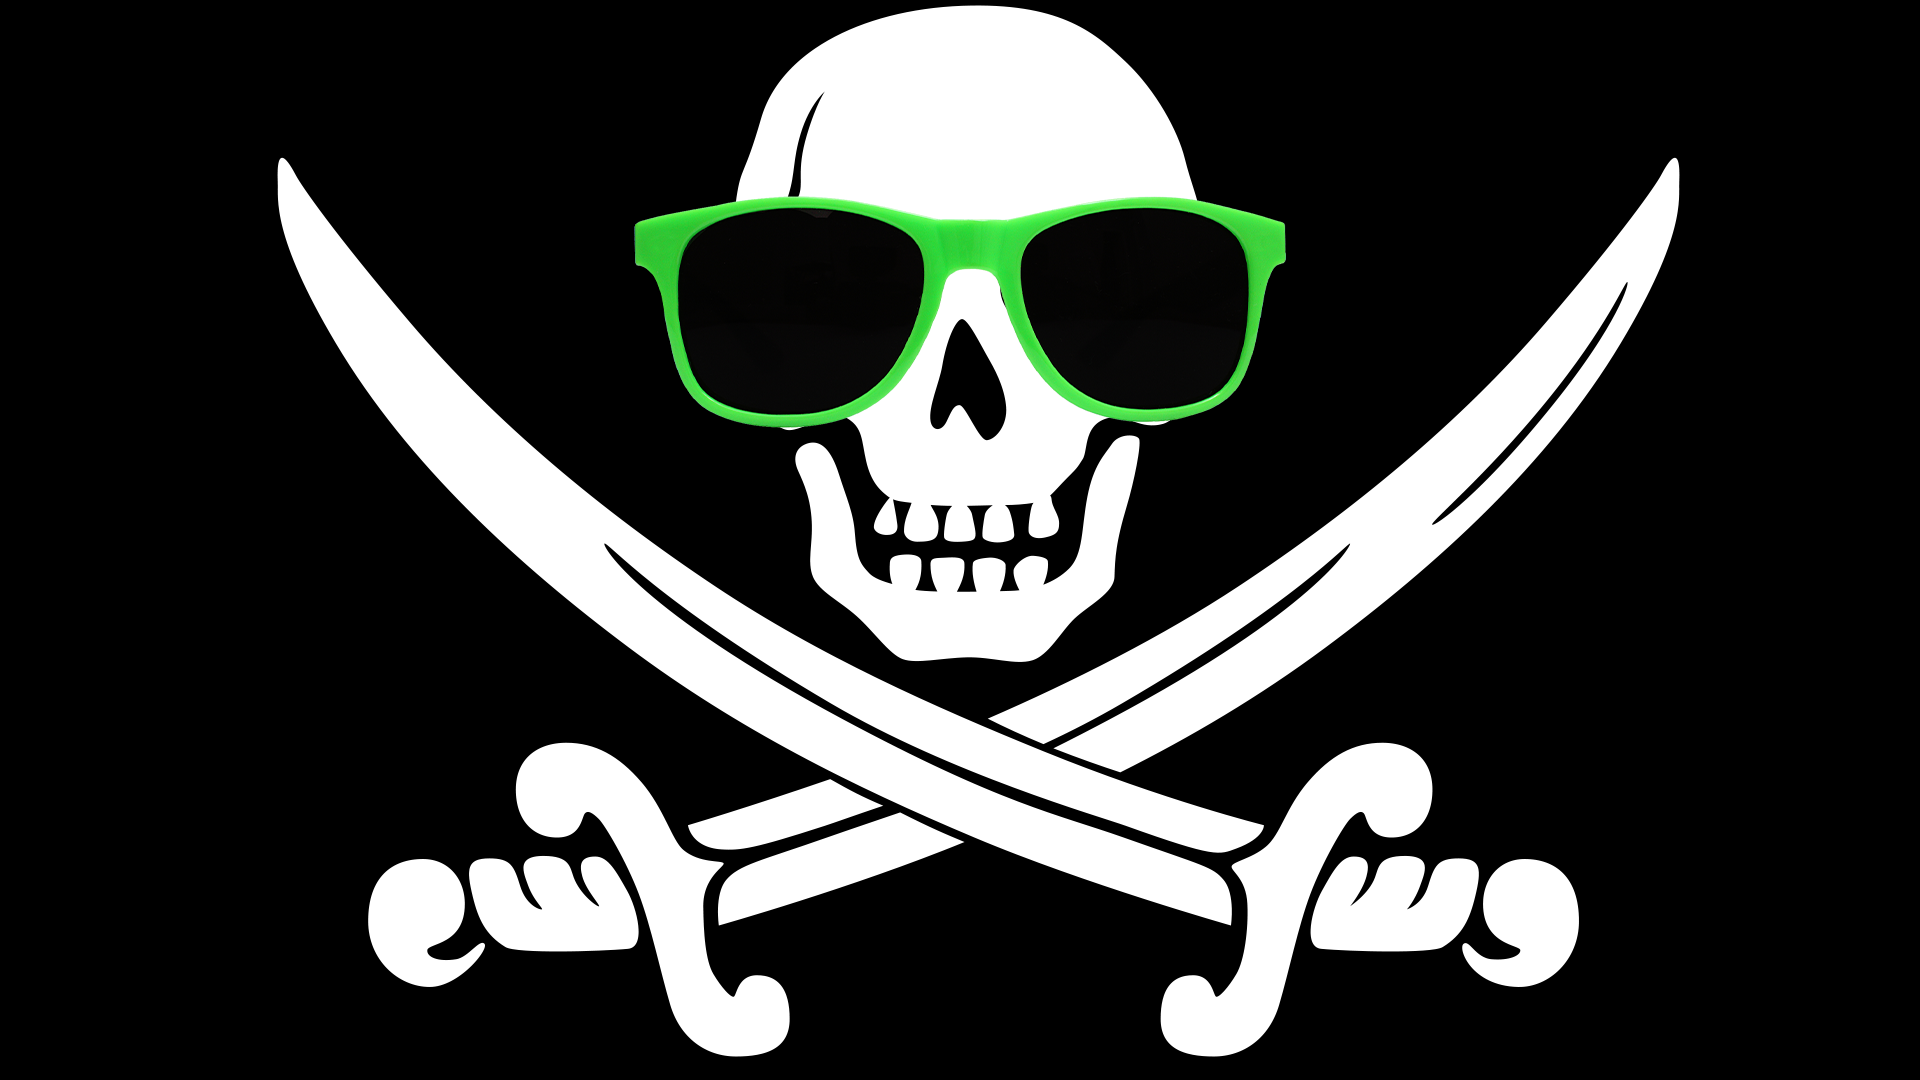 Pirate skull and crossbones with sunglaesses